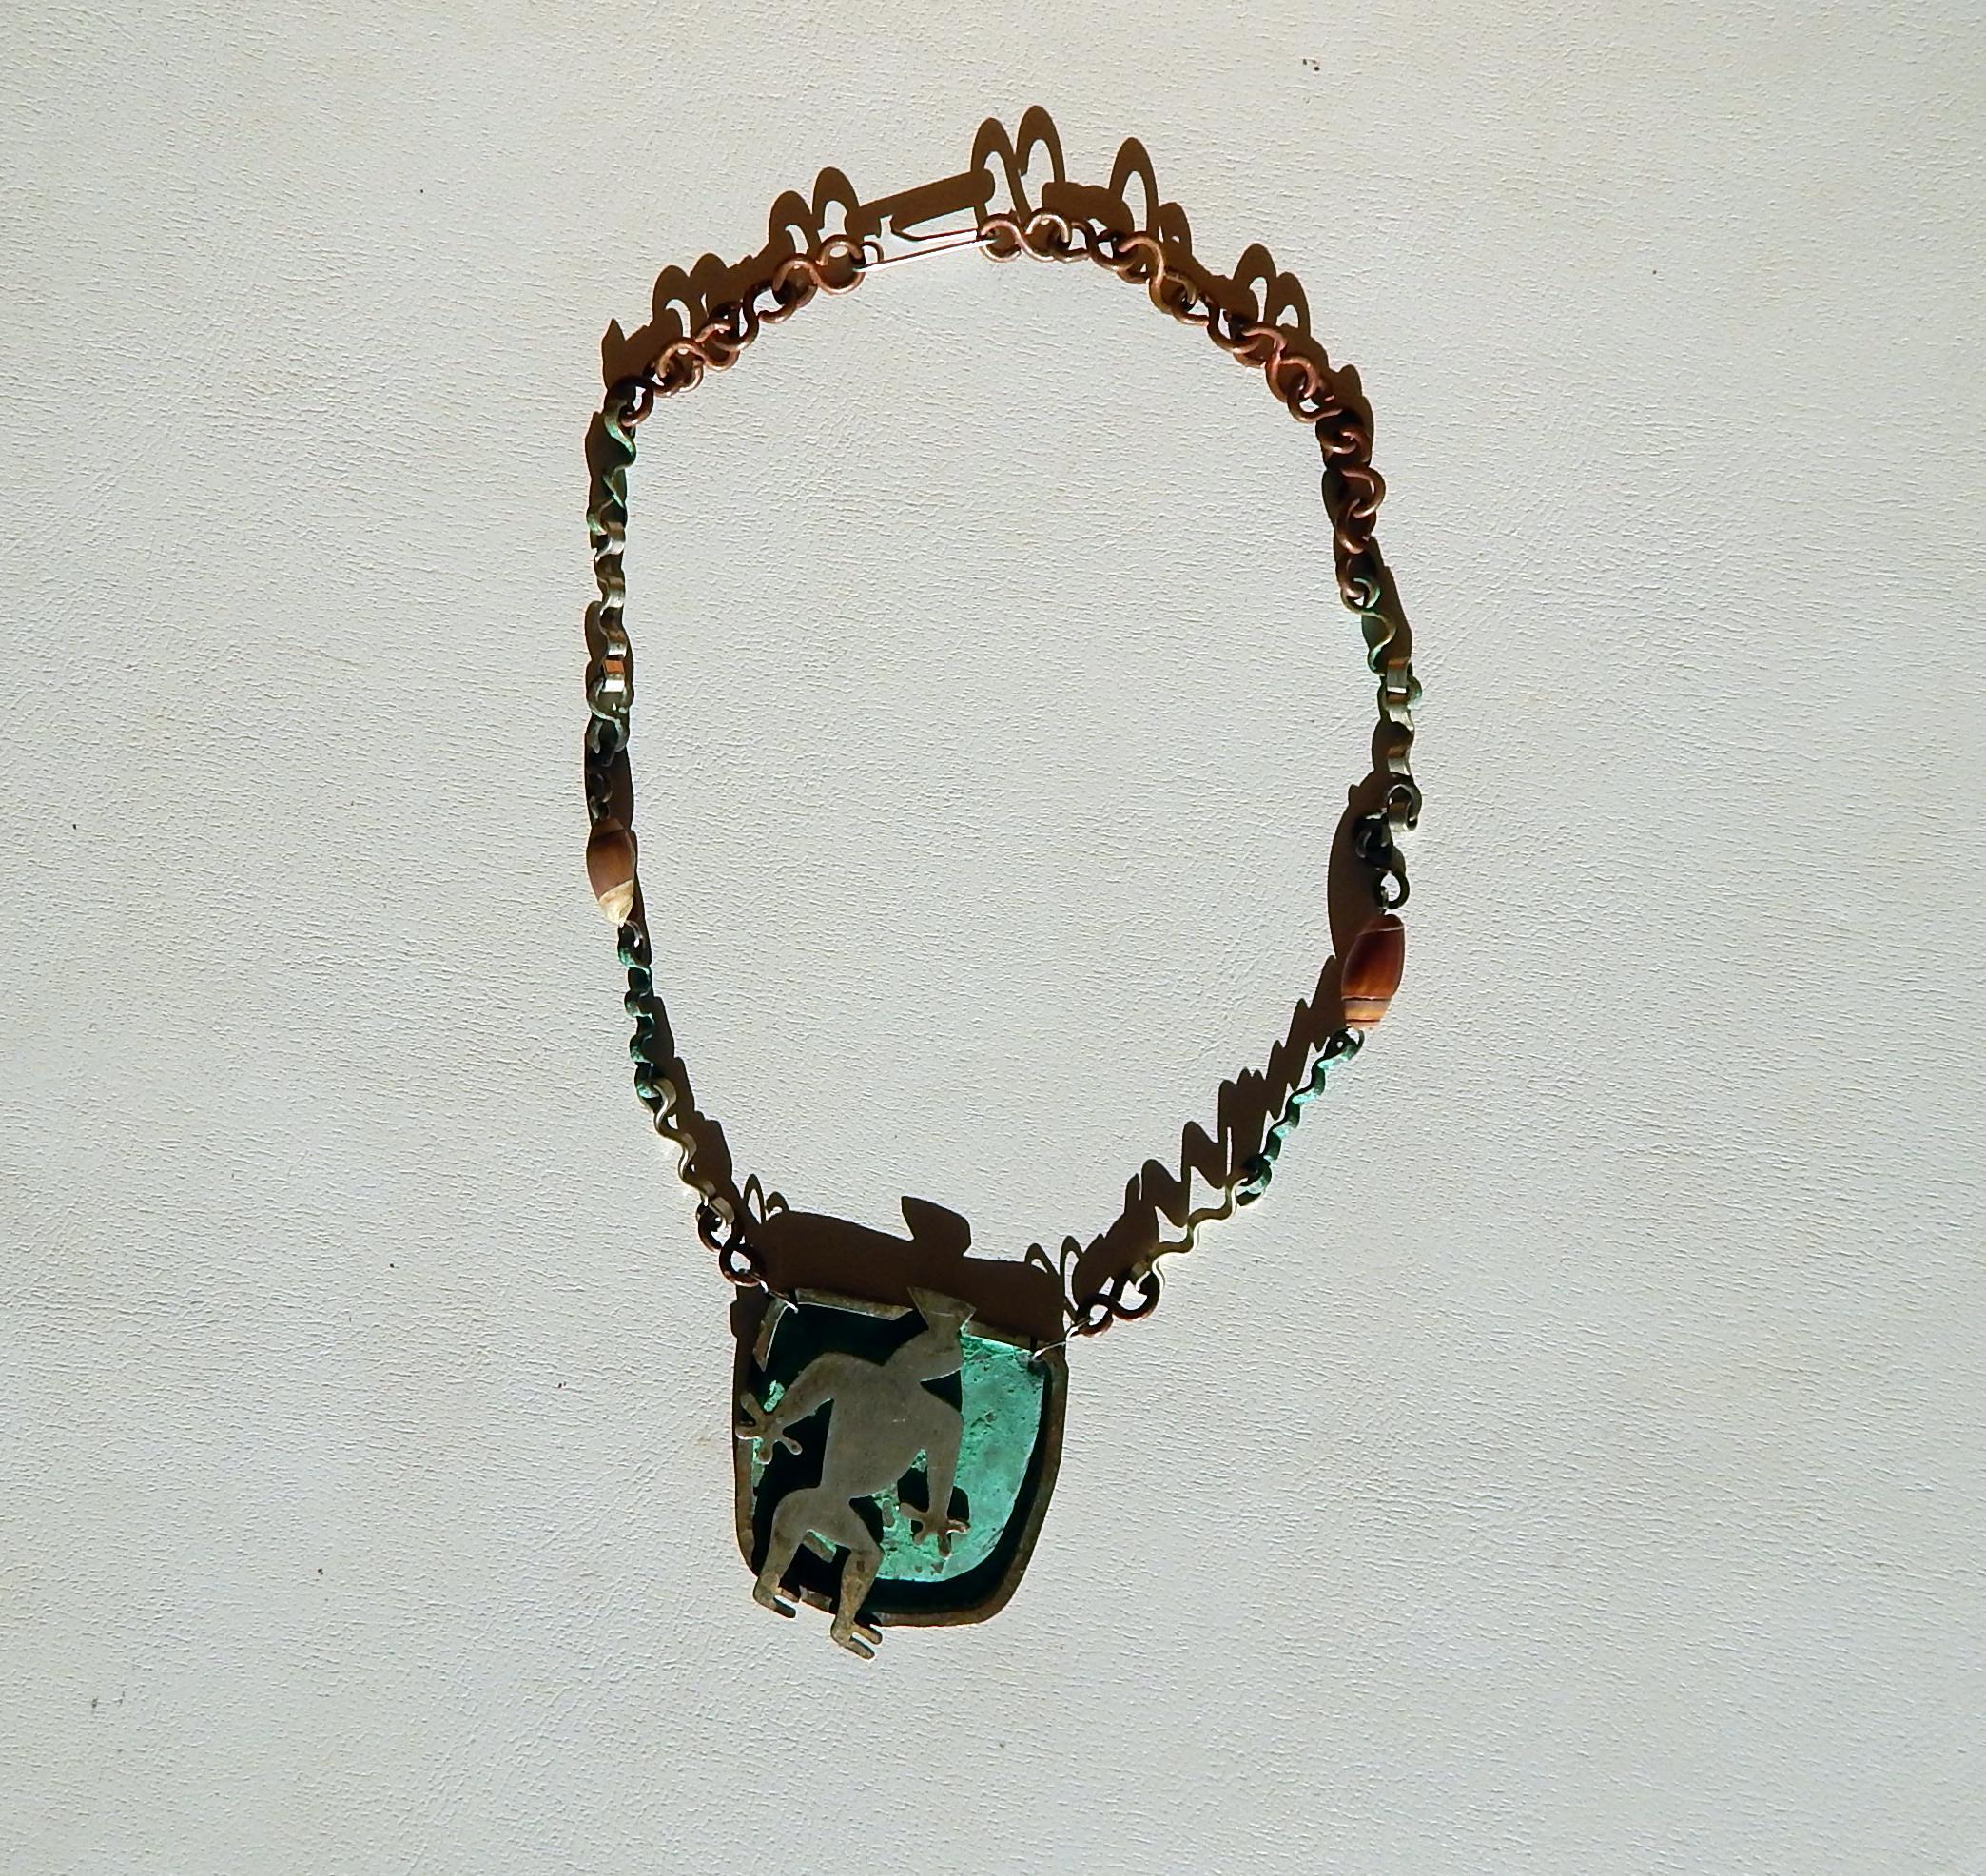 Modern pre-Columbian inspired vintage copper necklace made in Mexico by ex-pat artist Ken Beldin 1940s and 1950s.
Signed on the back: Ken Beldin & Mexico. In excellent vintage condition. Pendant measures: 2